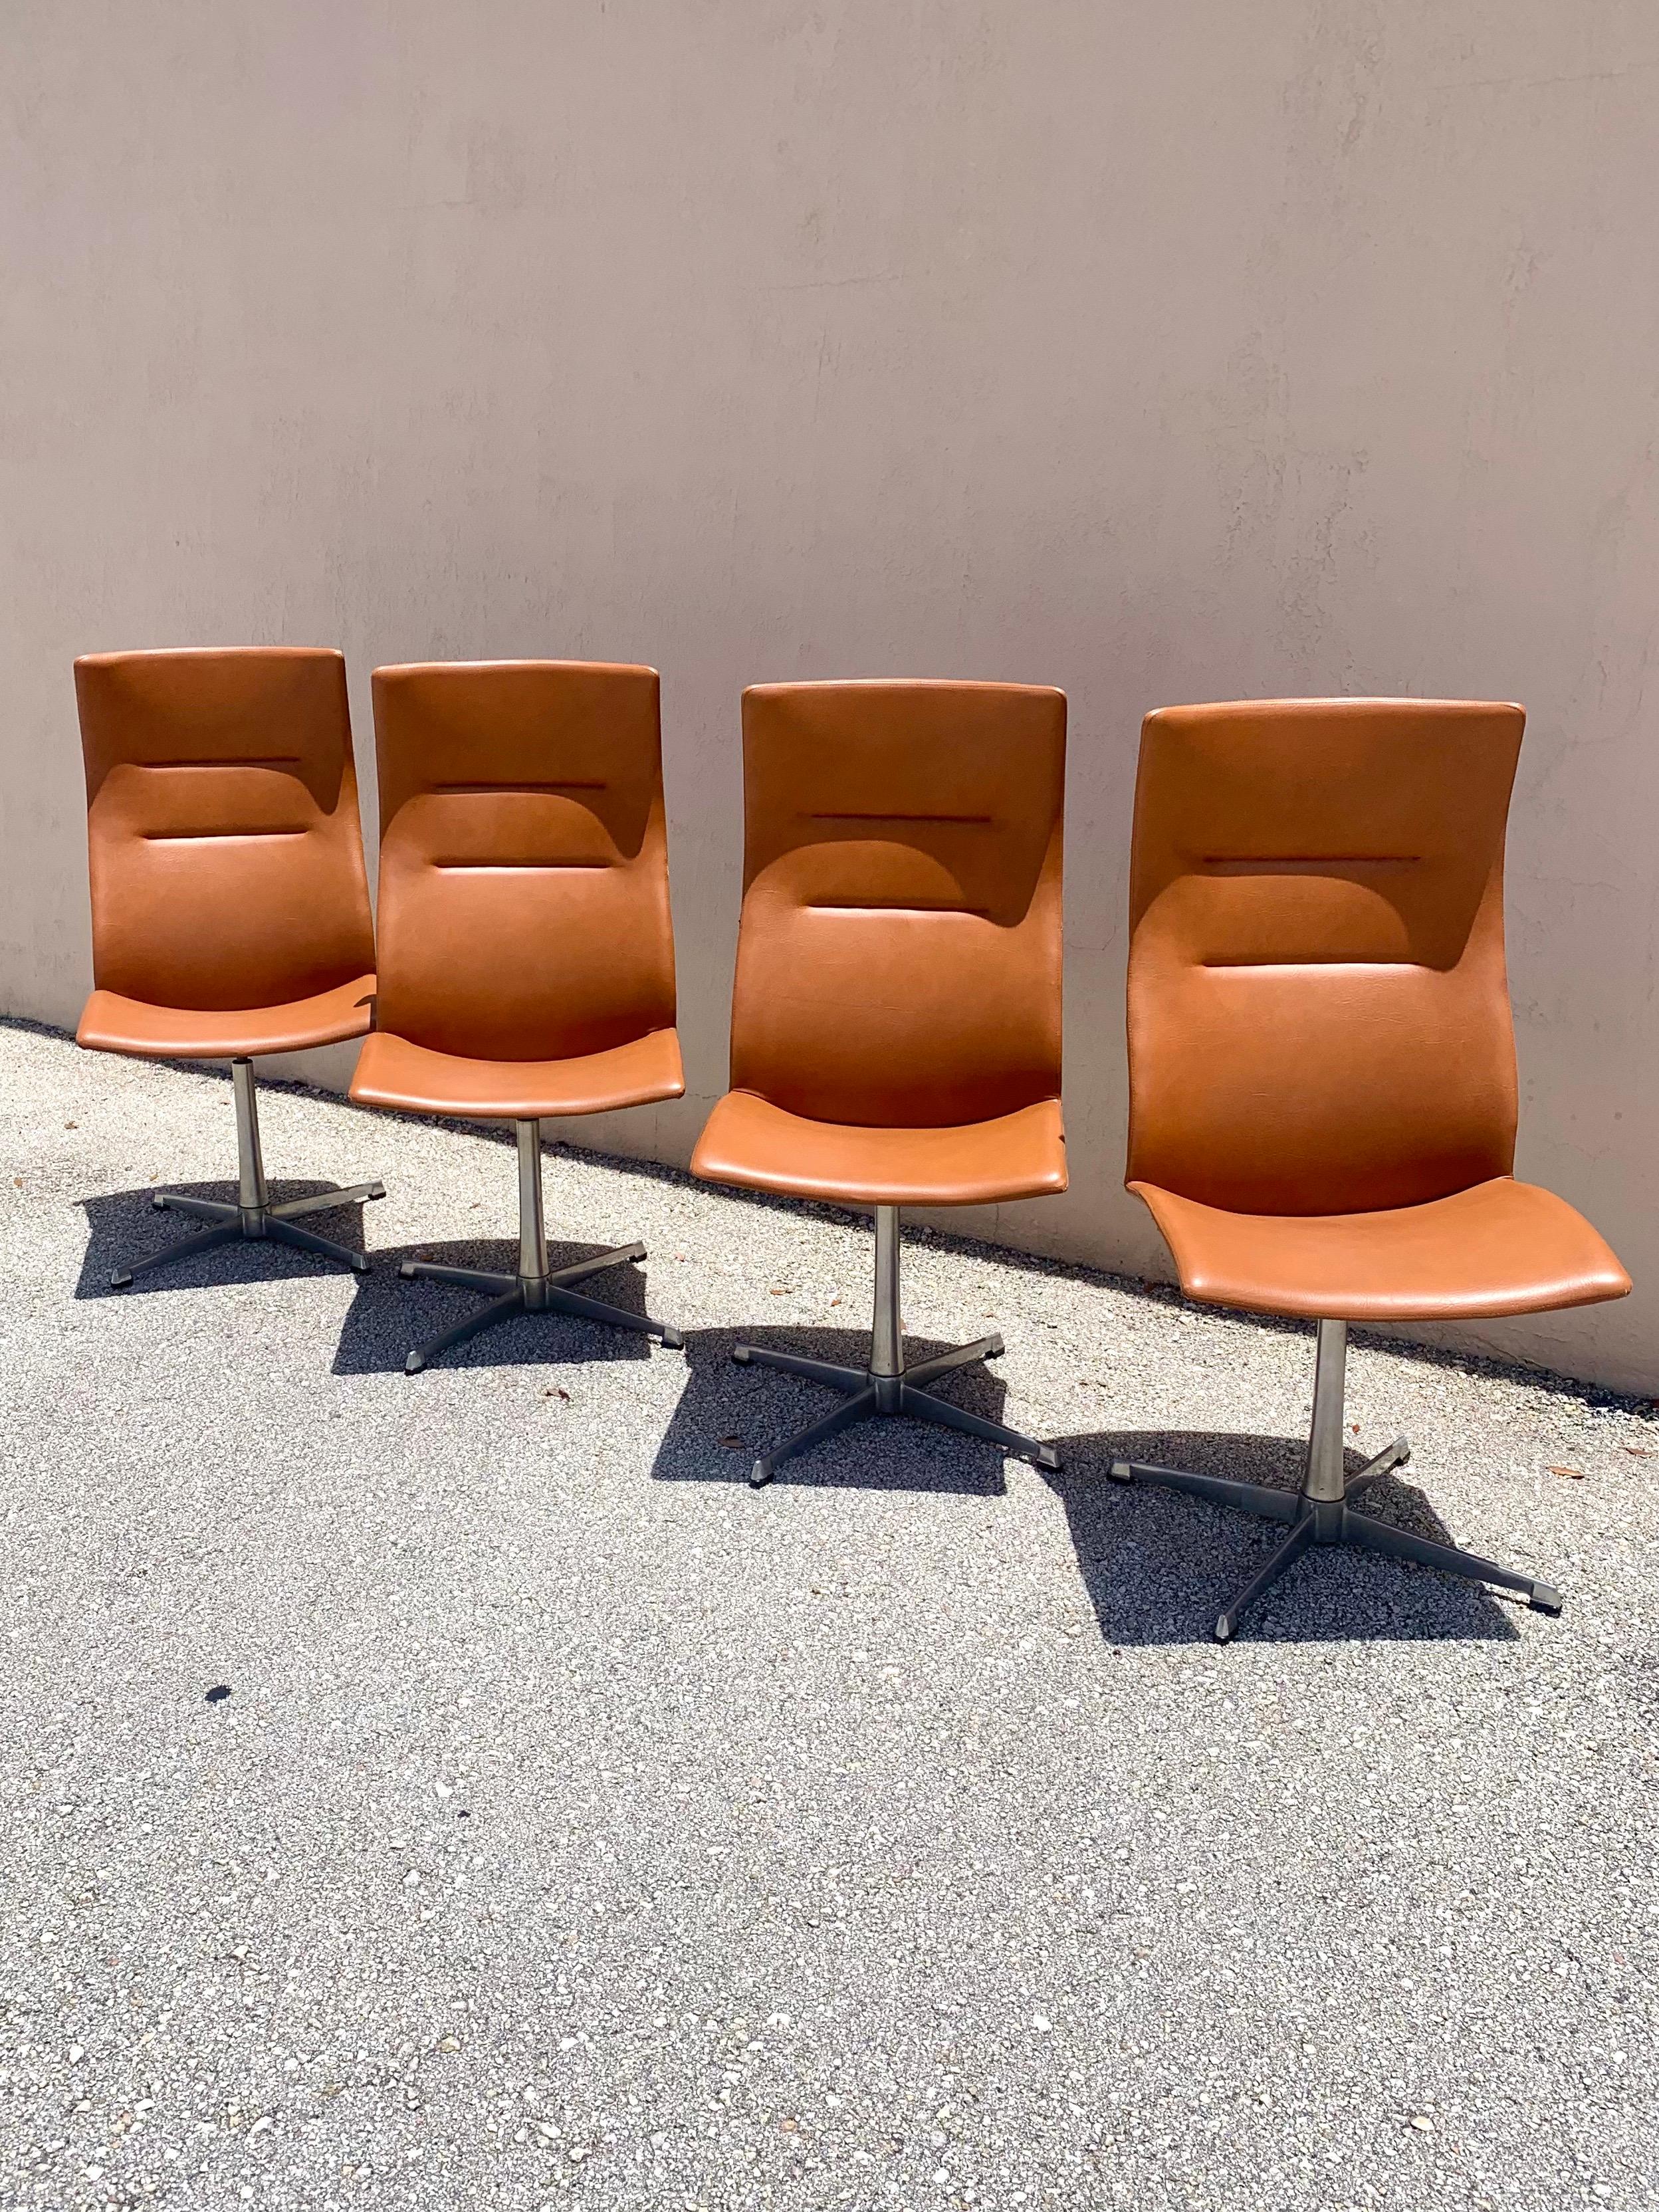 Awesome set of 4 dining chairs by Overman. Made in Sweden. High ergonomic Contoured back rests supported by an aluminum 4 star swivel base. Cognac colored high quality vinyl. Ultra comfortable and supportive seats. 

Chairs are in great condition